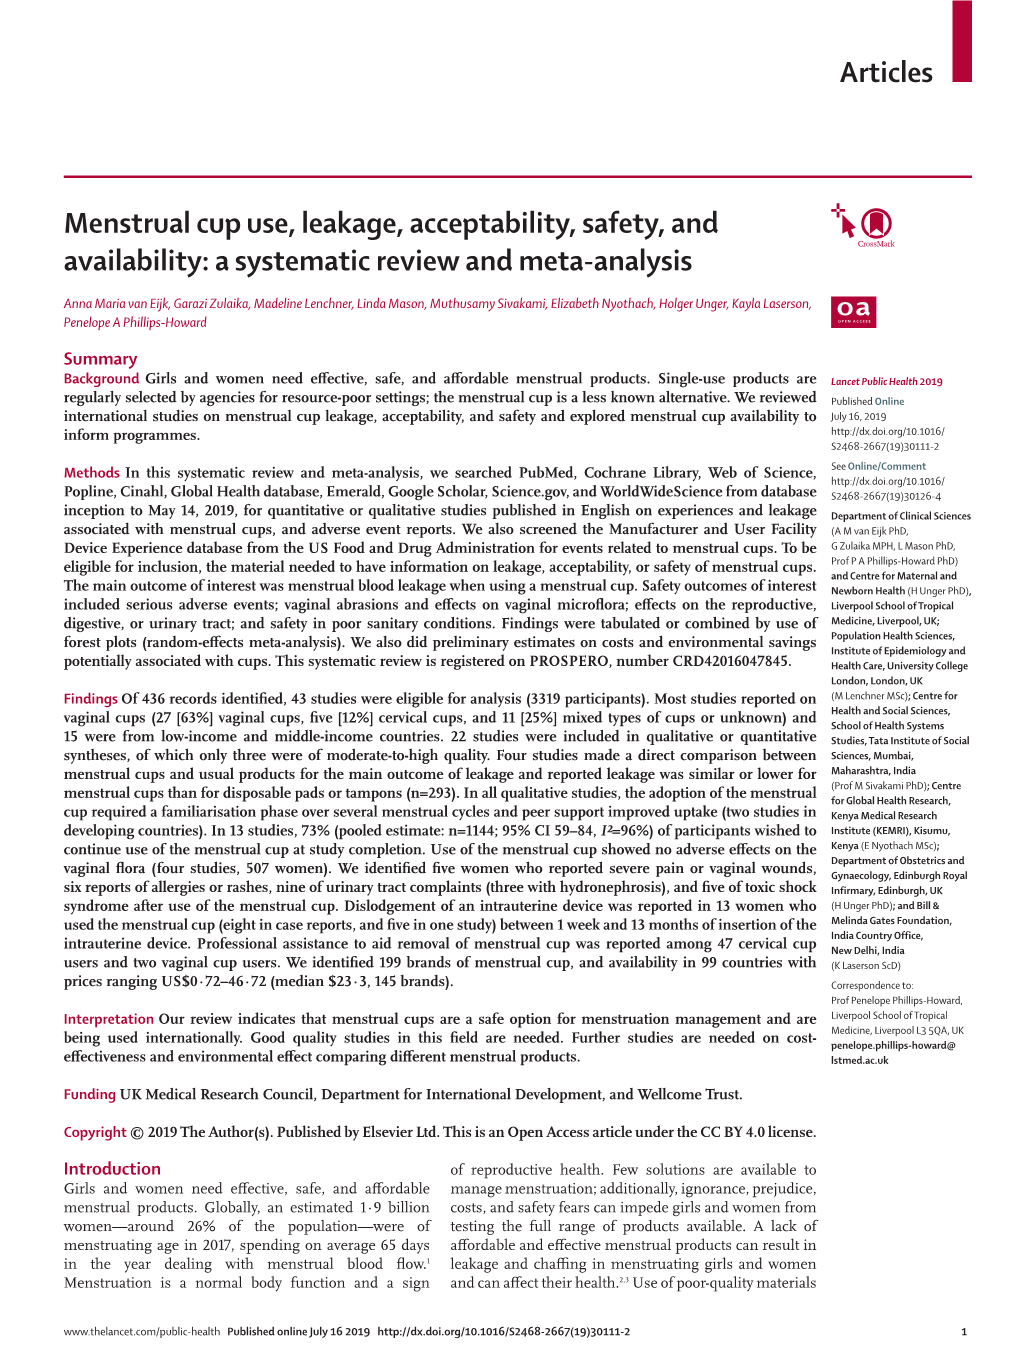 Menstrual Cup Use, Leakage, Acceptability, Safety, and Availability: a Systematic Review and Meta-Analysis